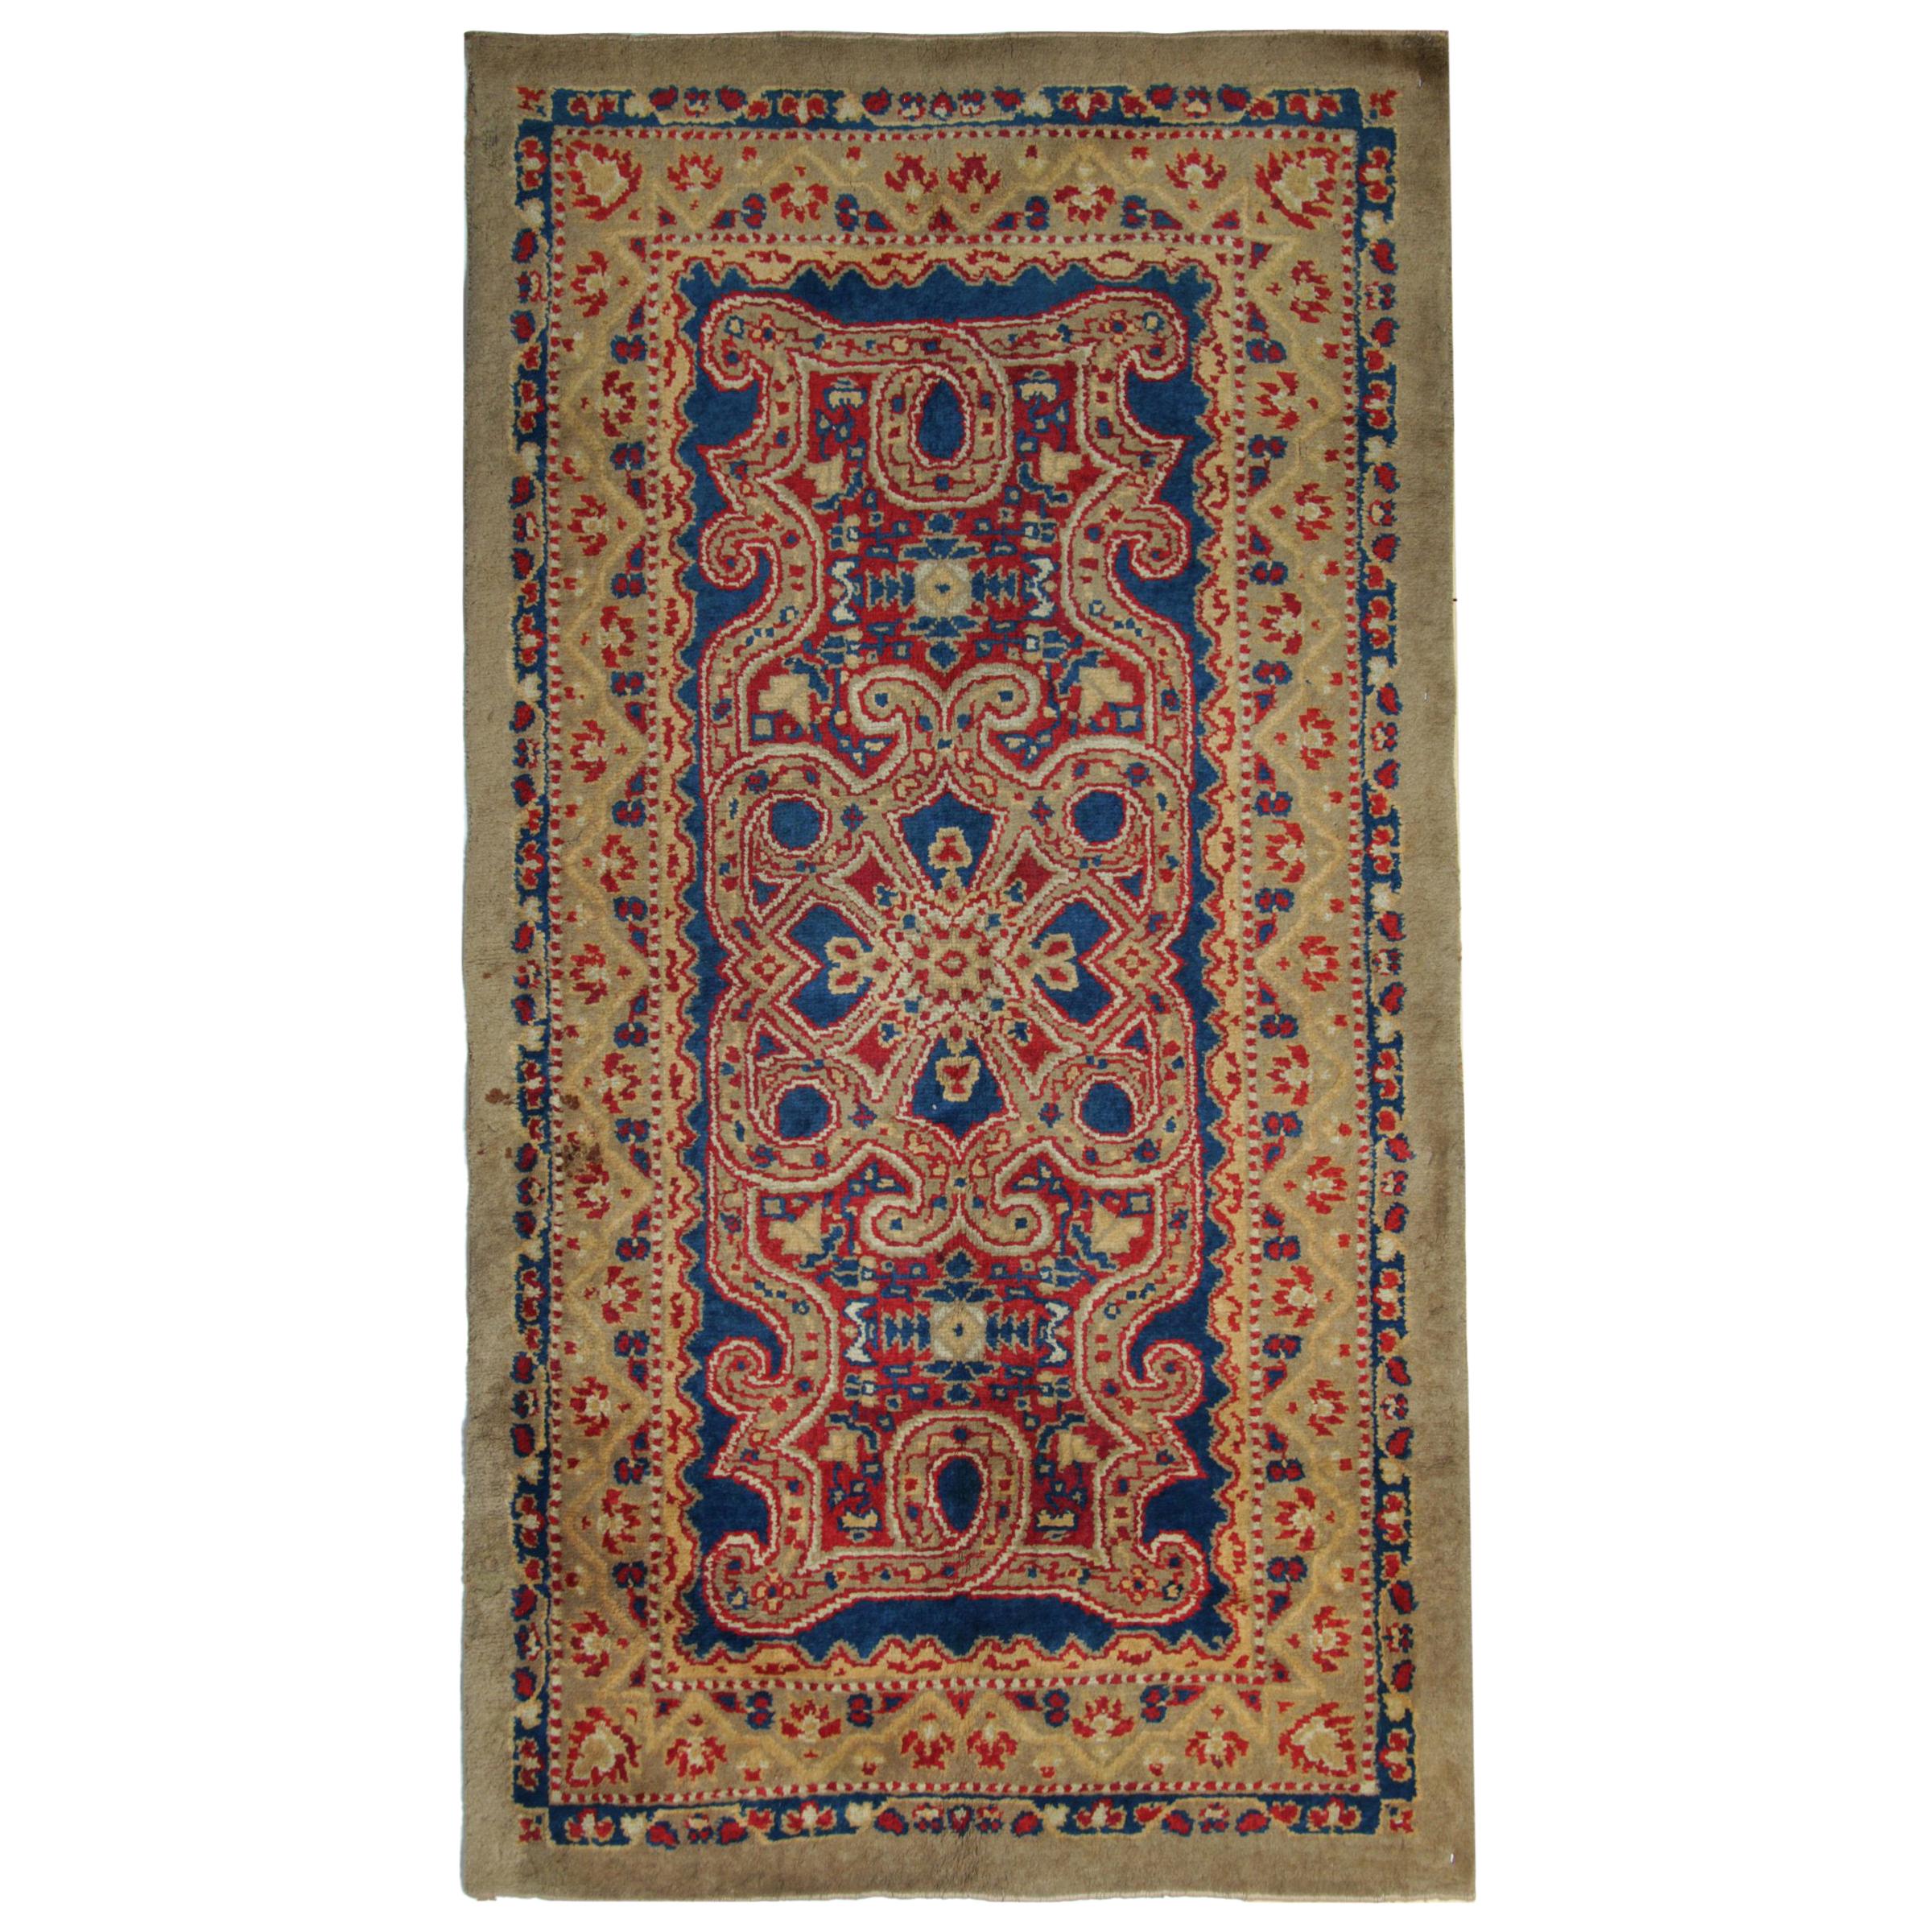 Handmade Carpet Rugs, Exceptional Antique British Axminster, Art Deco Rugs For Sale